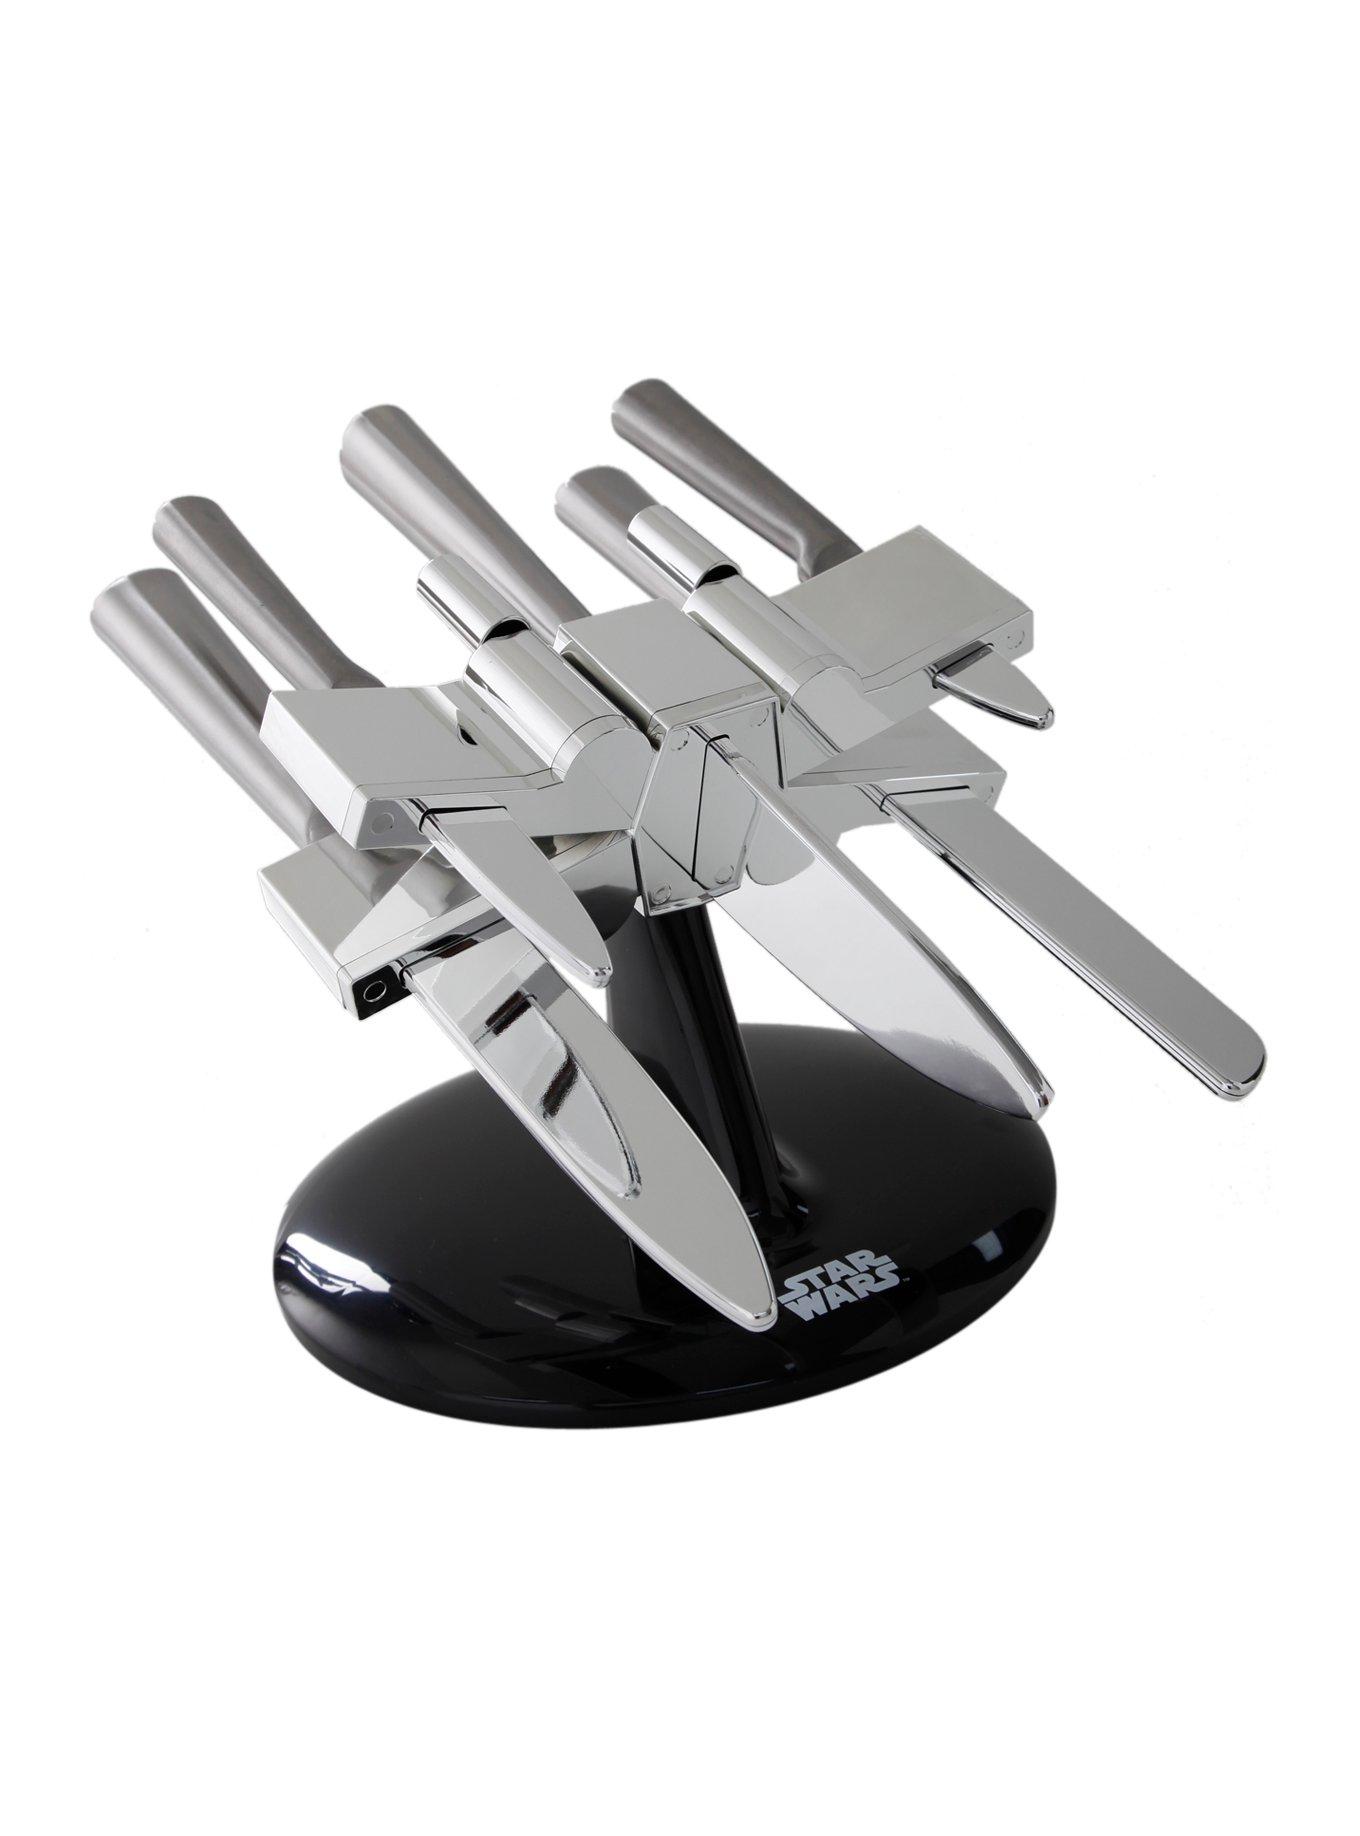 Star Wars X-Wing Knife Block  Cool Sh*t You Can Buy - Find Cool Things To  Buy